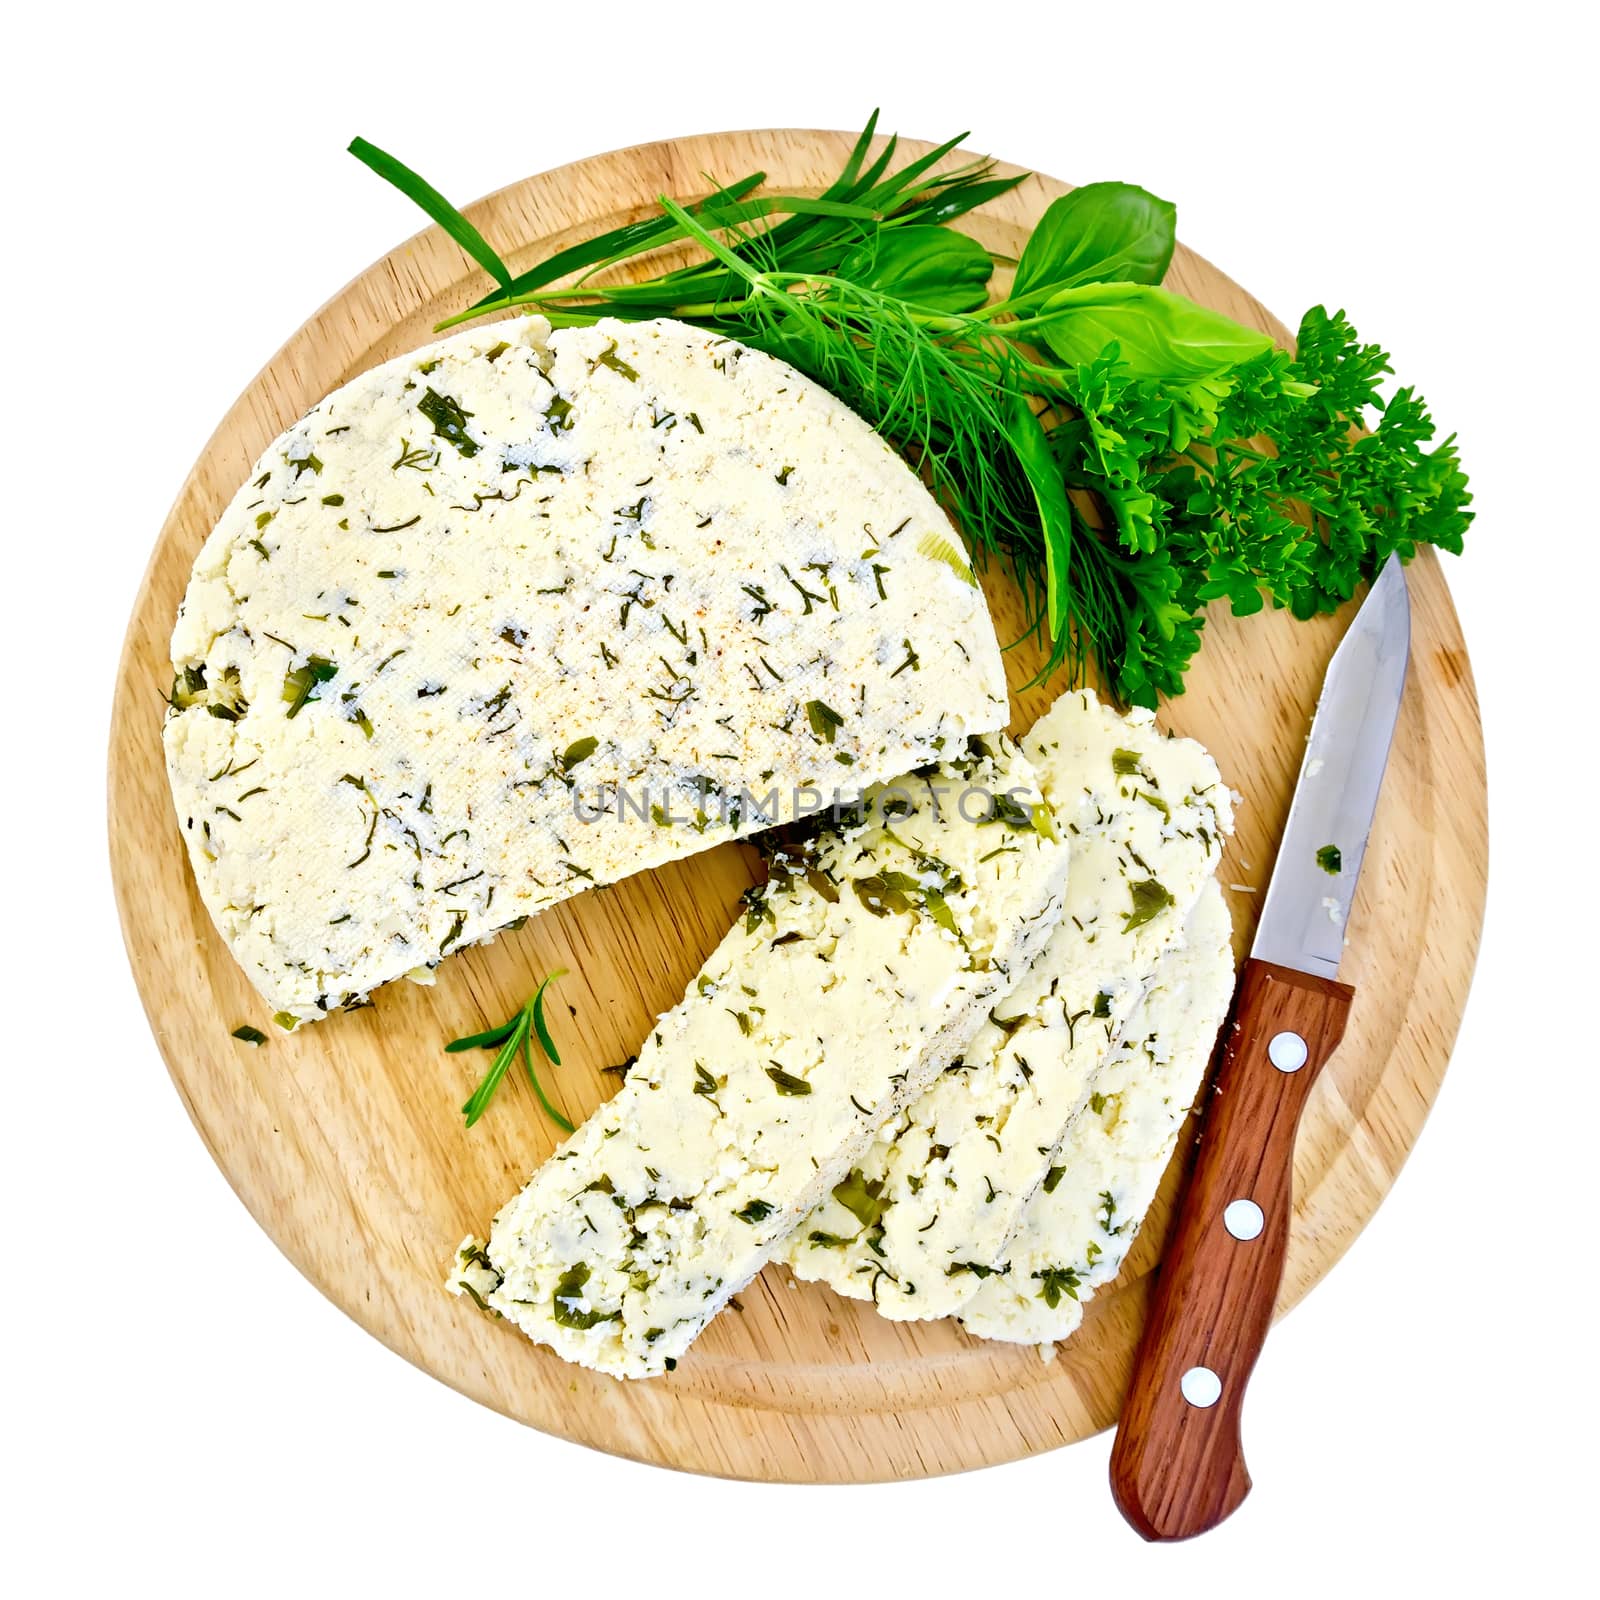 Homemade round cheese with herbs and spices, knife on a round wooden board isolated on white background